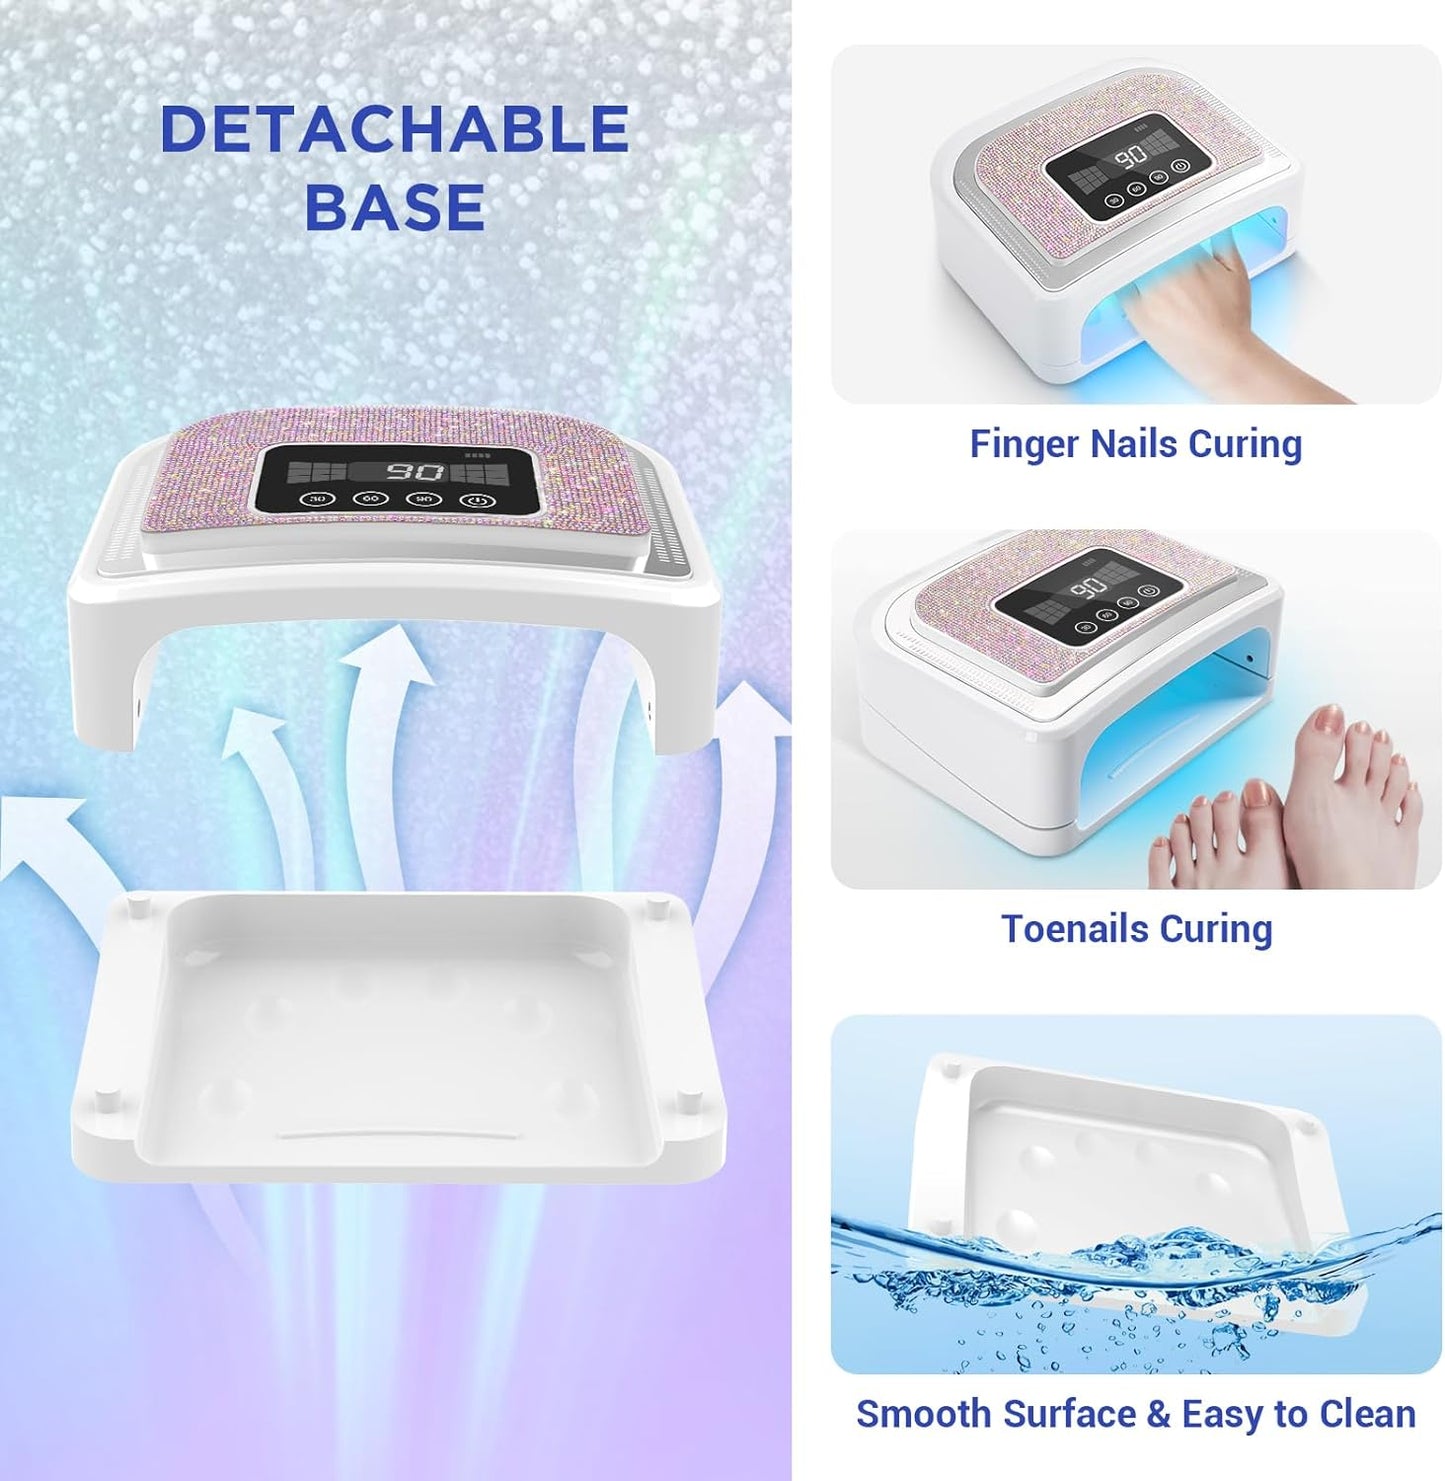 Cordless Nail Lamp, 120W Rechargeable UV Nail Lamp for Gel Nails, LED Nail Lamp with 4 Timer Modes, Gel Nail Light Decorate with Sparkling Nail Rhinestones Diamond